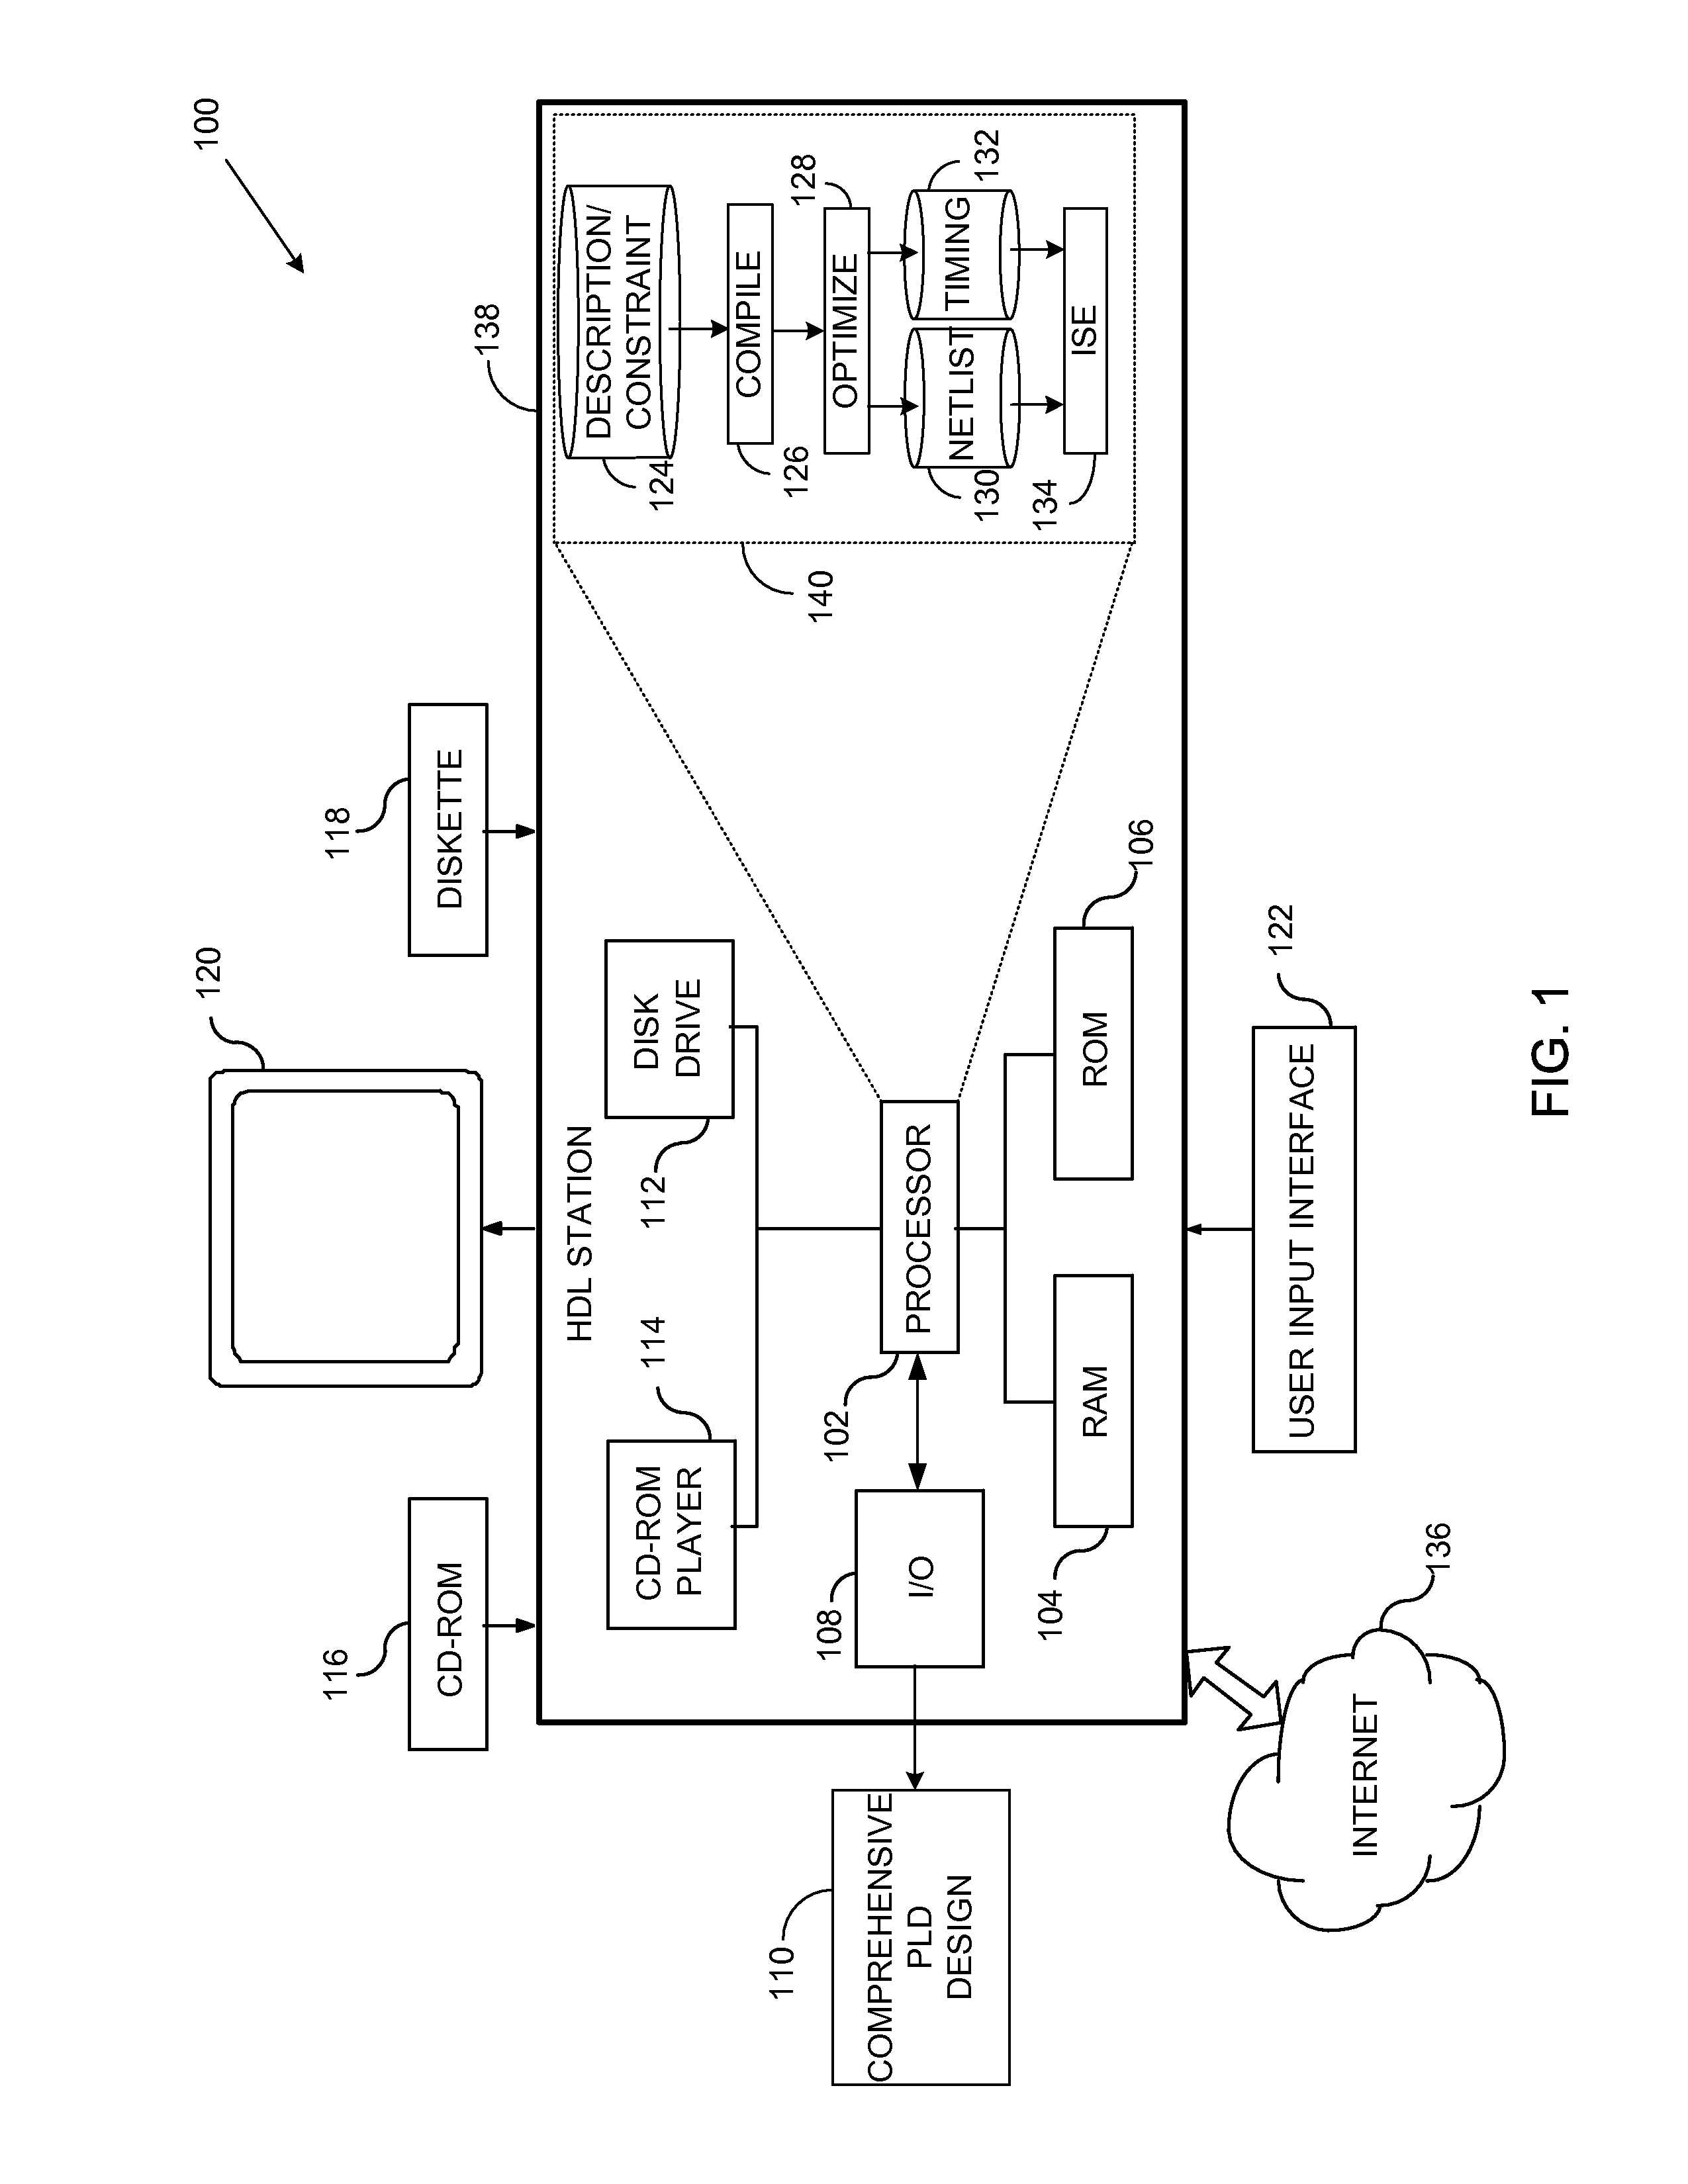 Method of automating clock signal provisioning within an integrated circuit